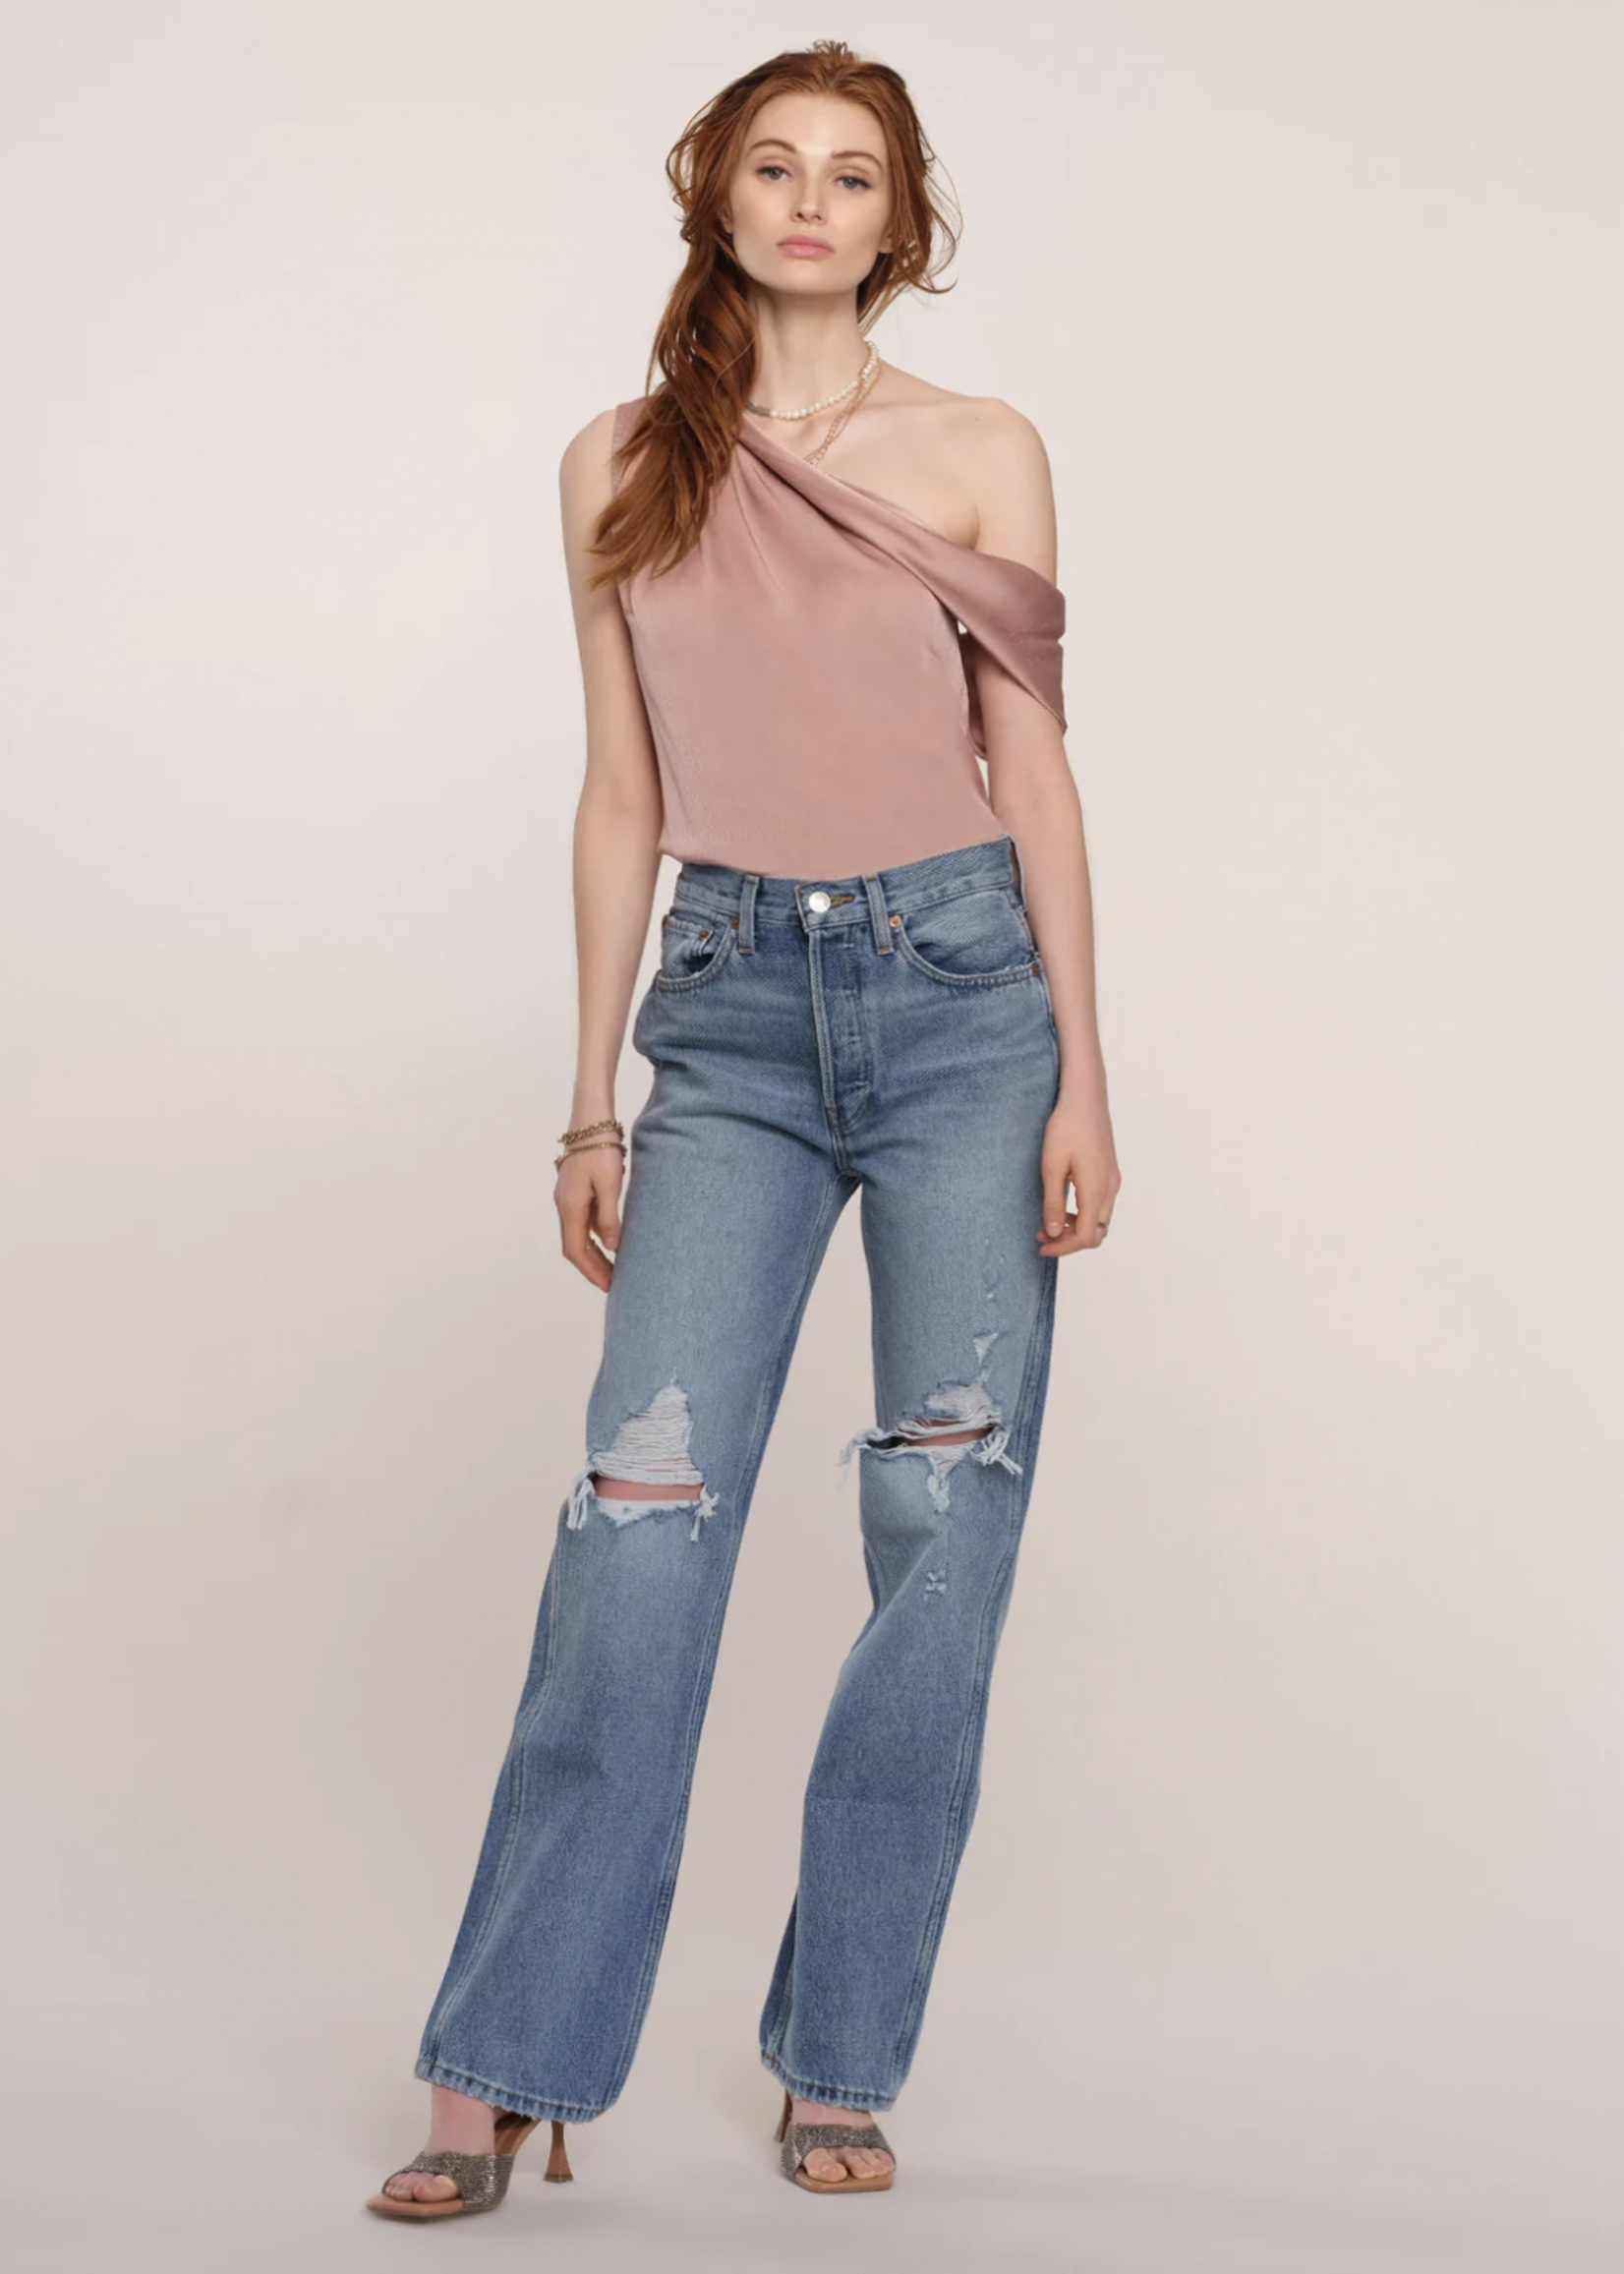 Elitaire Boutique Emmalina Top in Blush